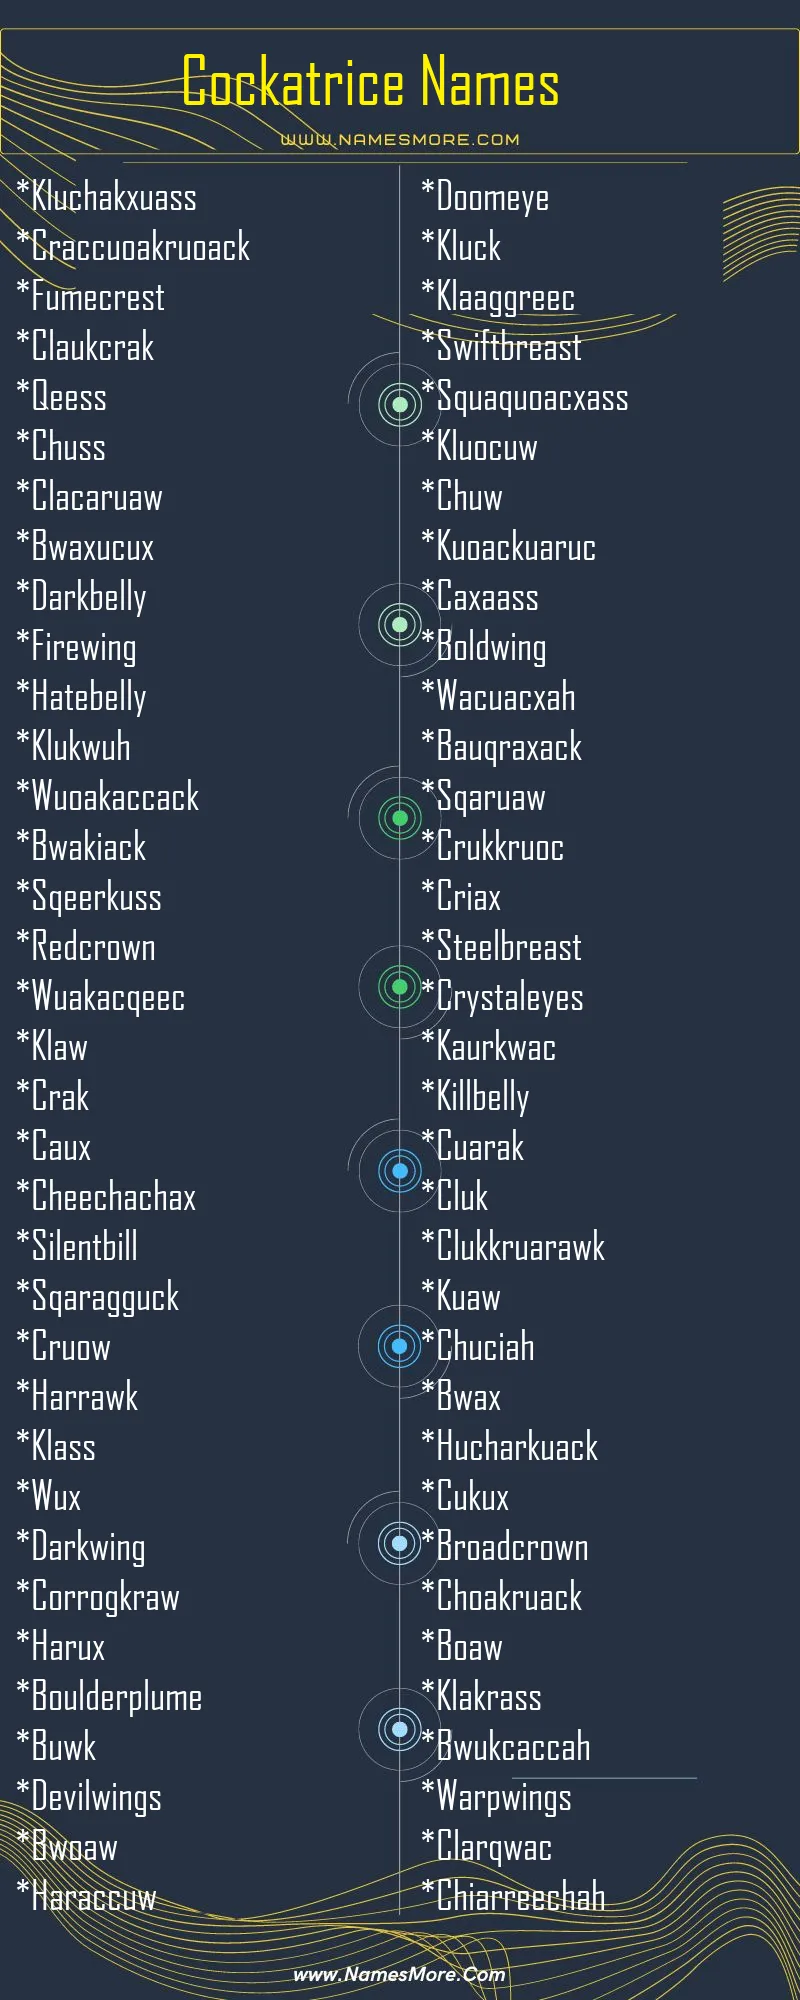 2400+ Cockatrice Names (Cool & Best) List Infographic